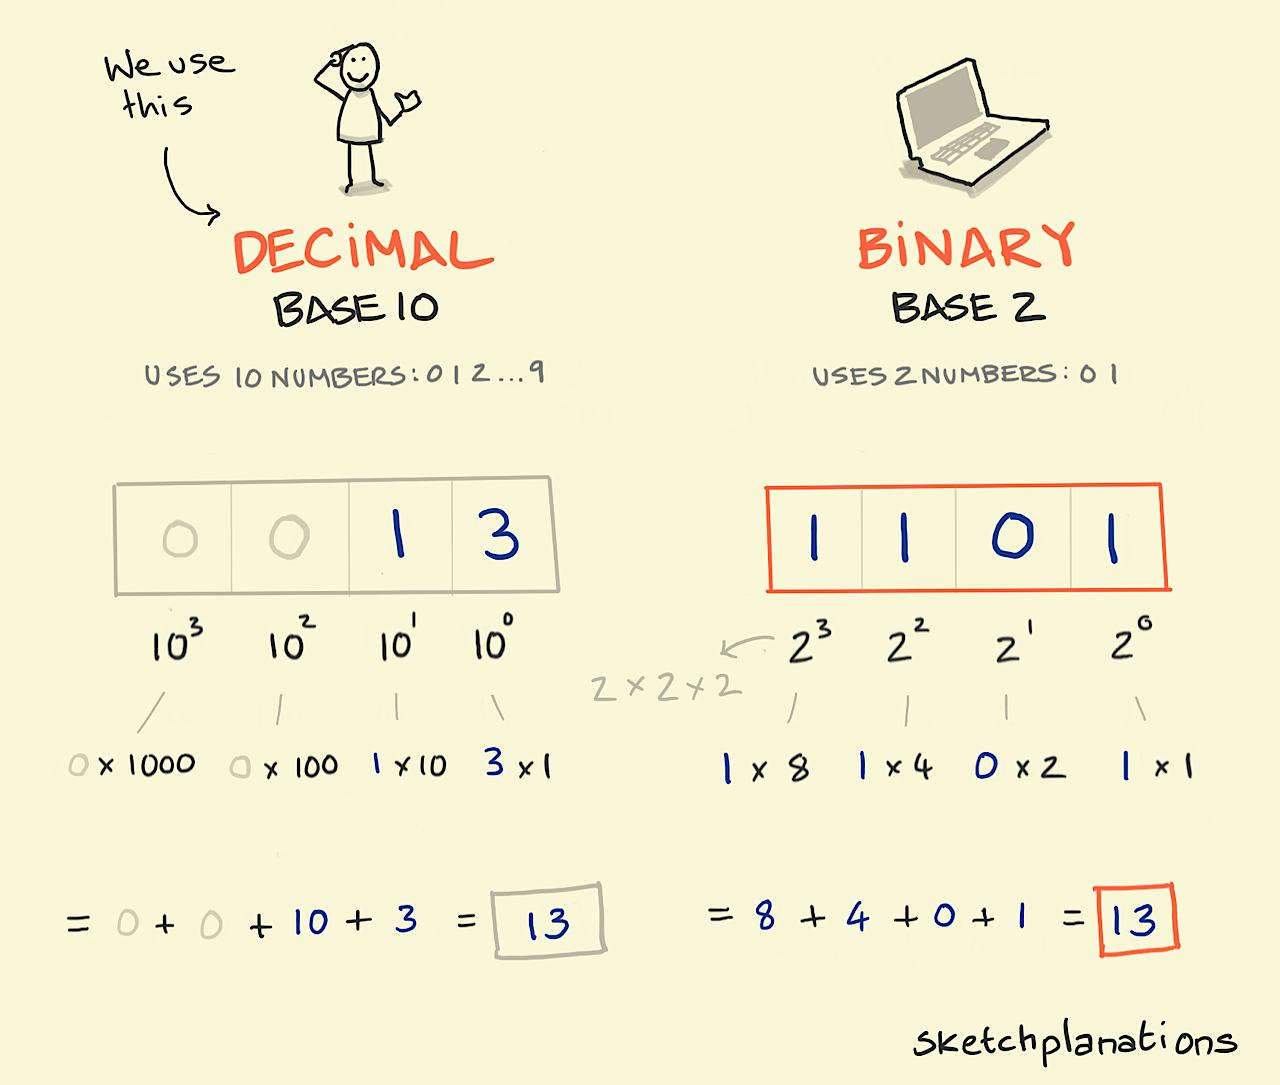 A breakdown of constructing the number 13 in the decimal system of base 10 next to 13 written in the base 2 of binary